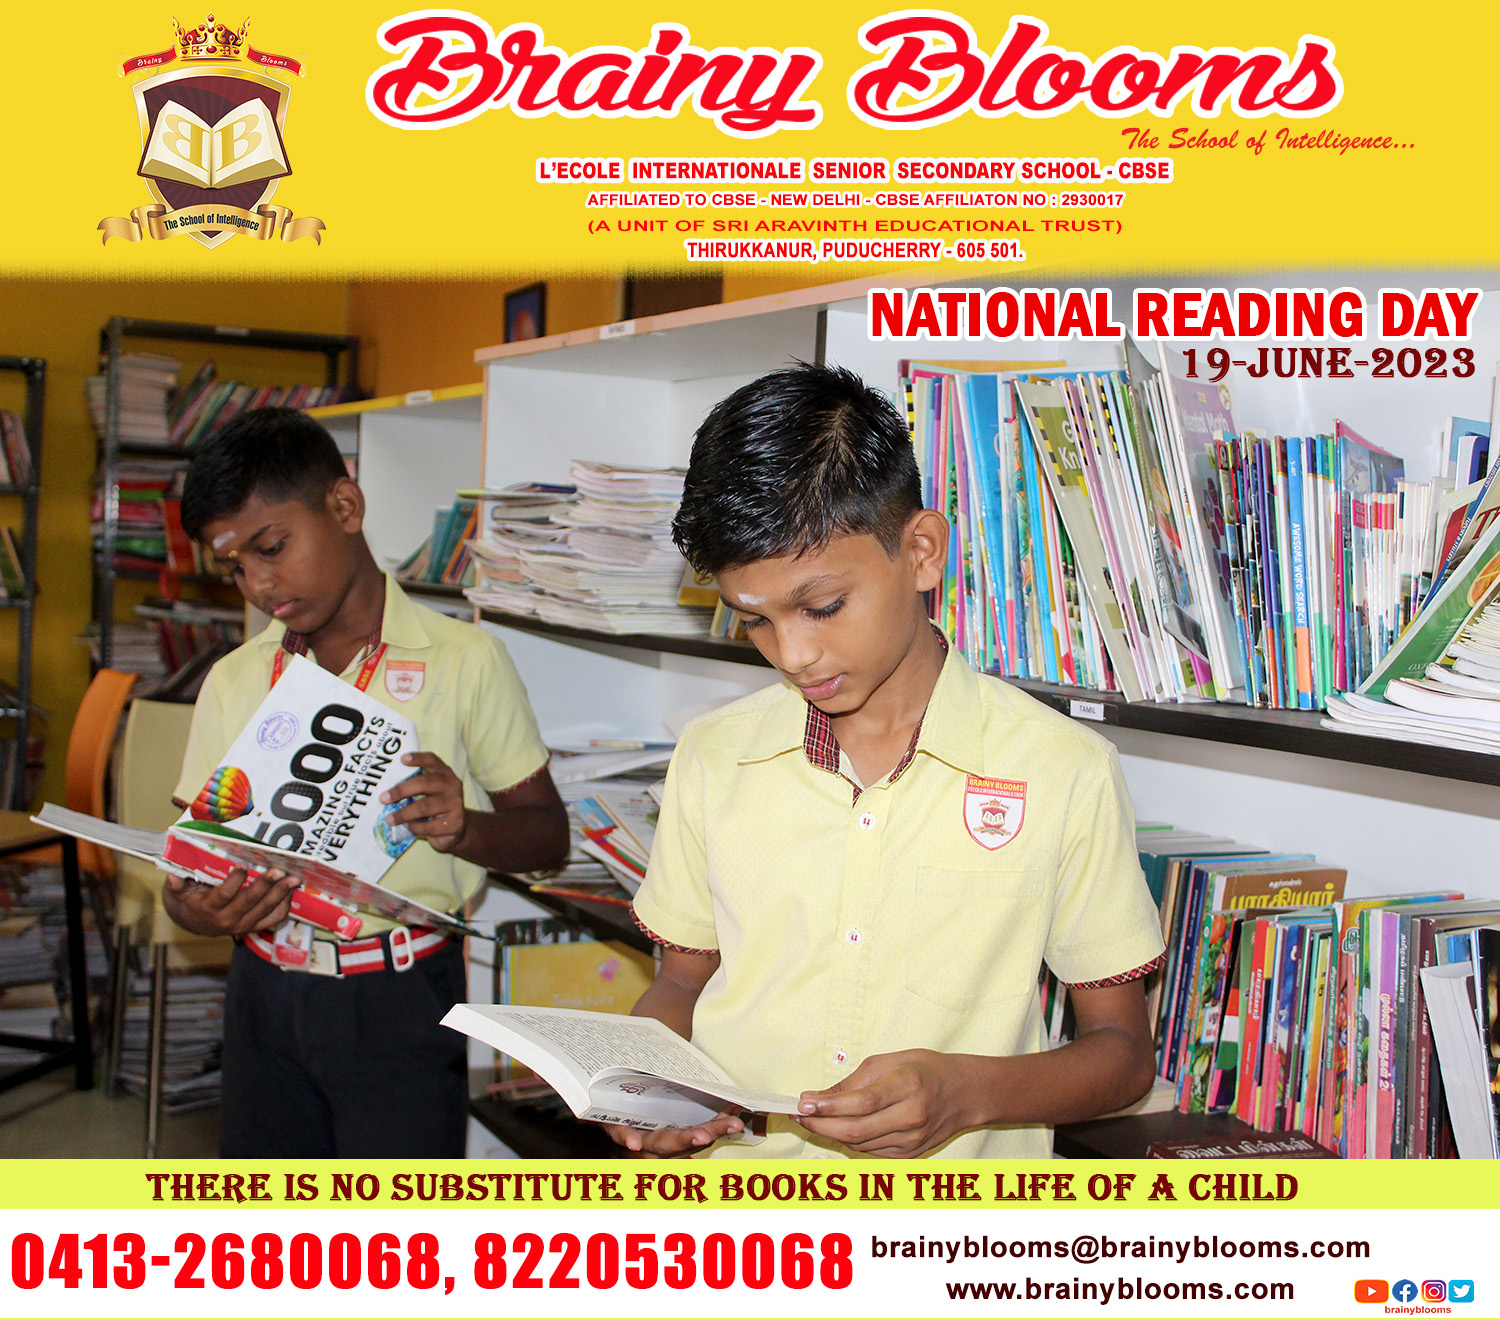 library of Brainy Blooms